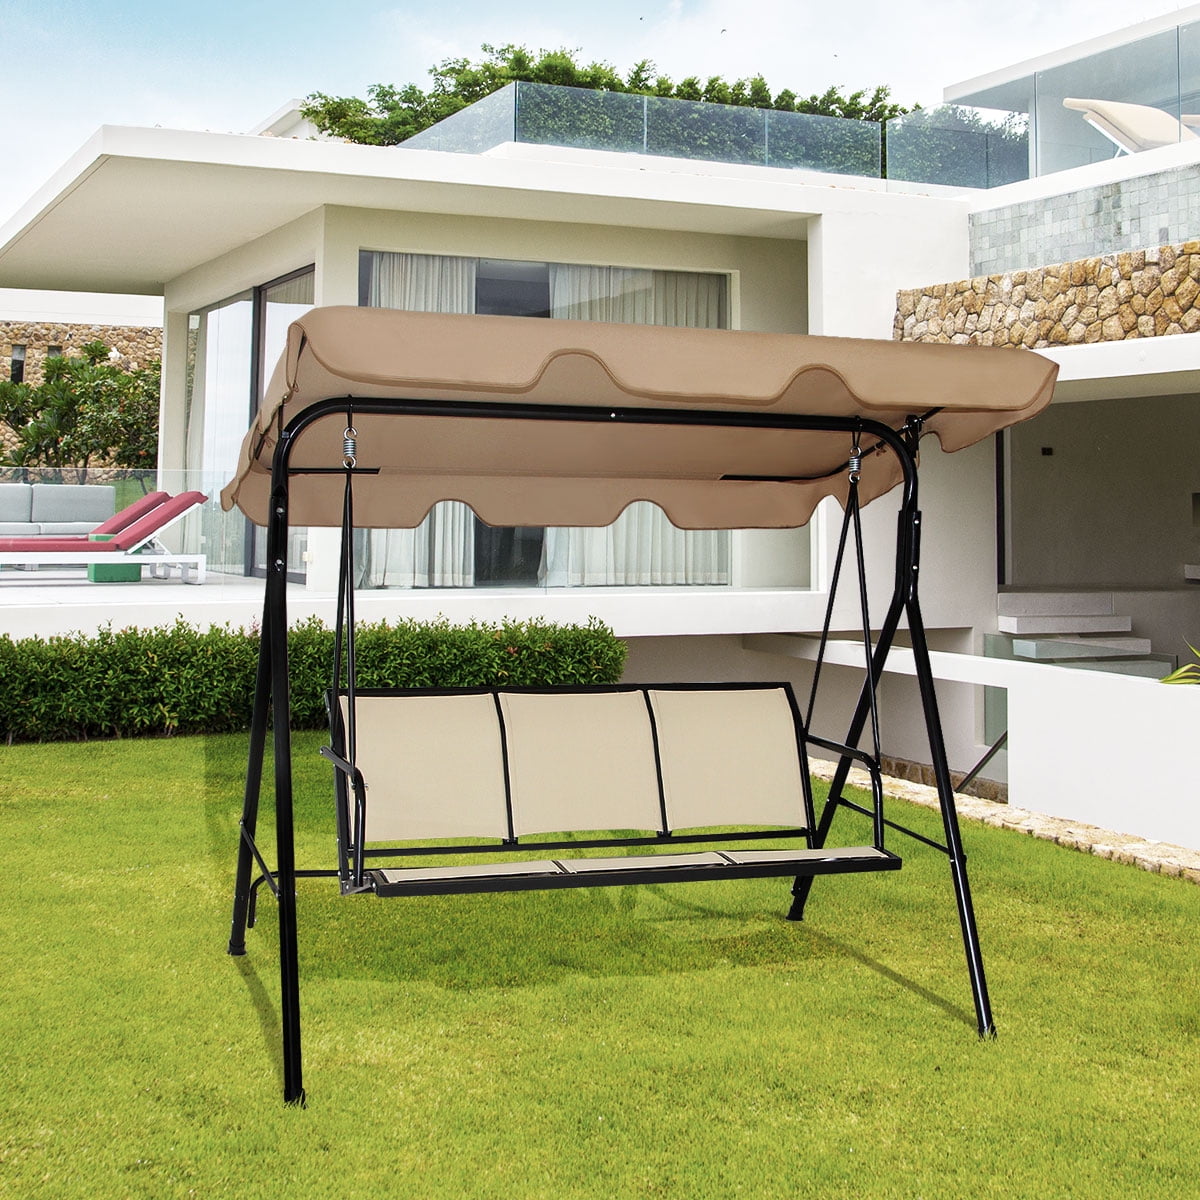 PATIO GARDEN HAMMOCK HELICOPTER OUTDOOR SWING CHAIR SEAT SUN LOUNGER CUSIONS 4C 